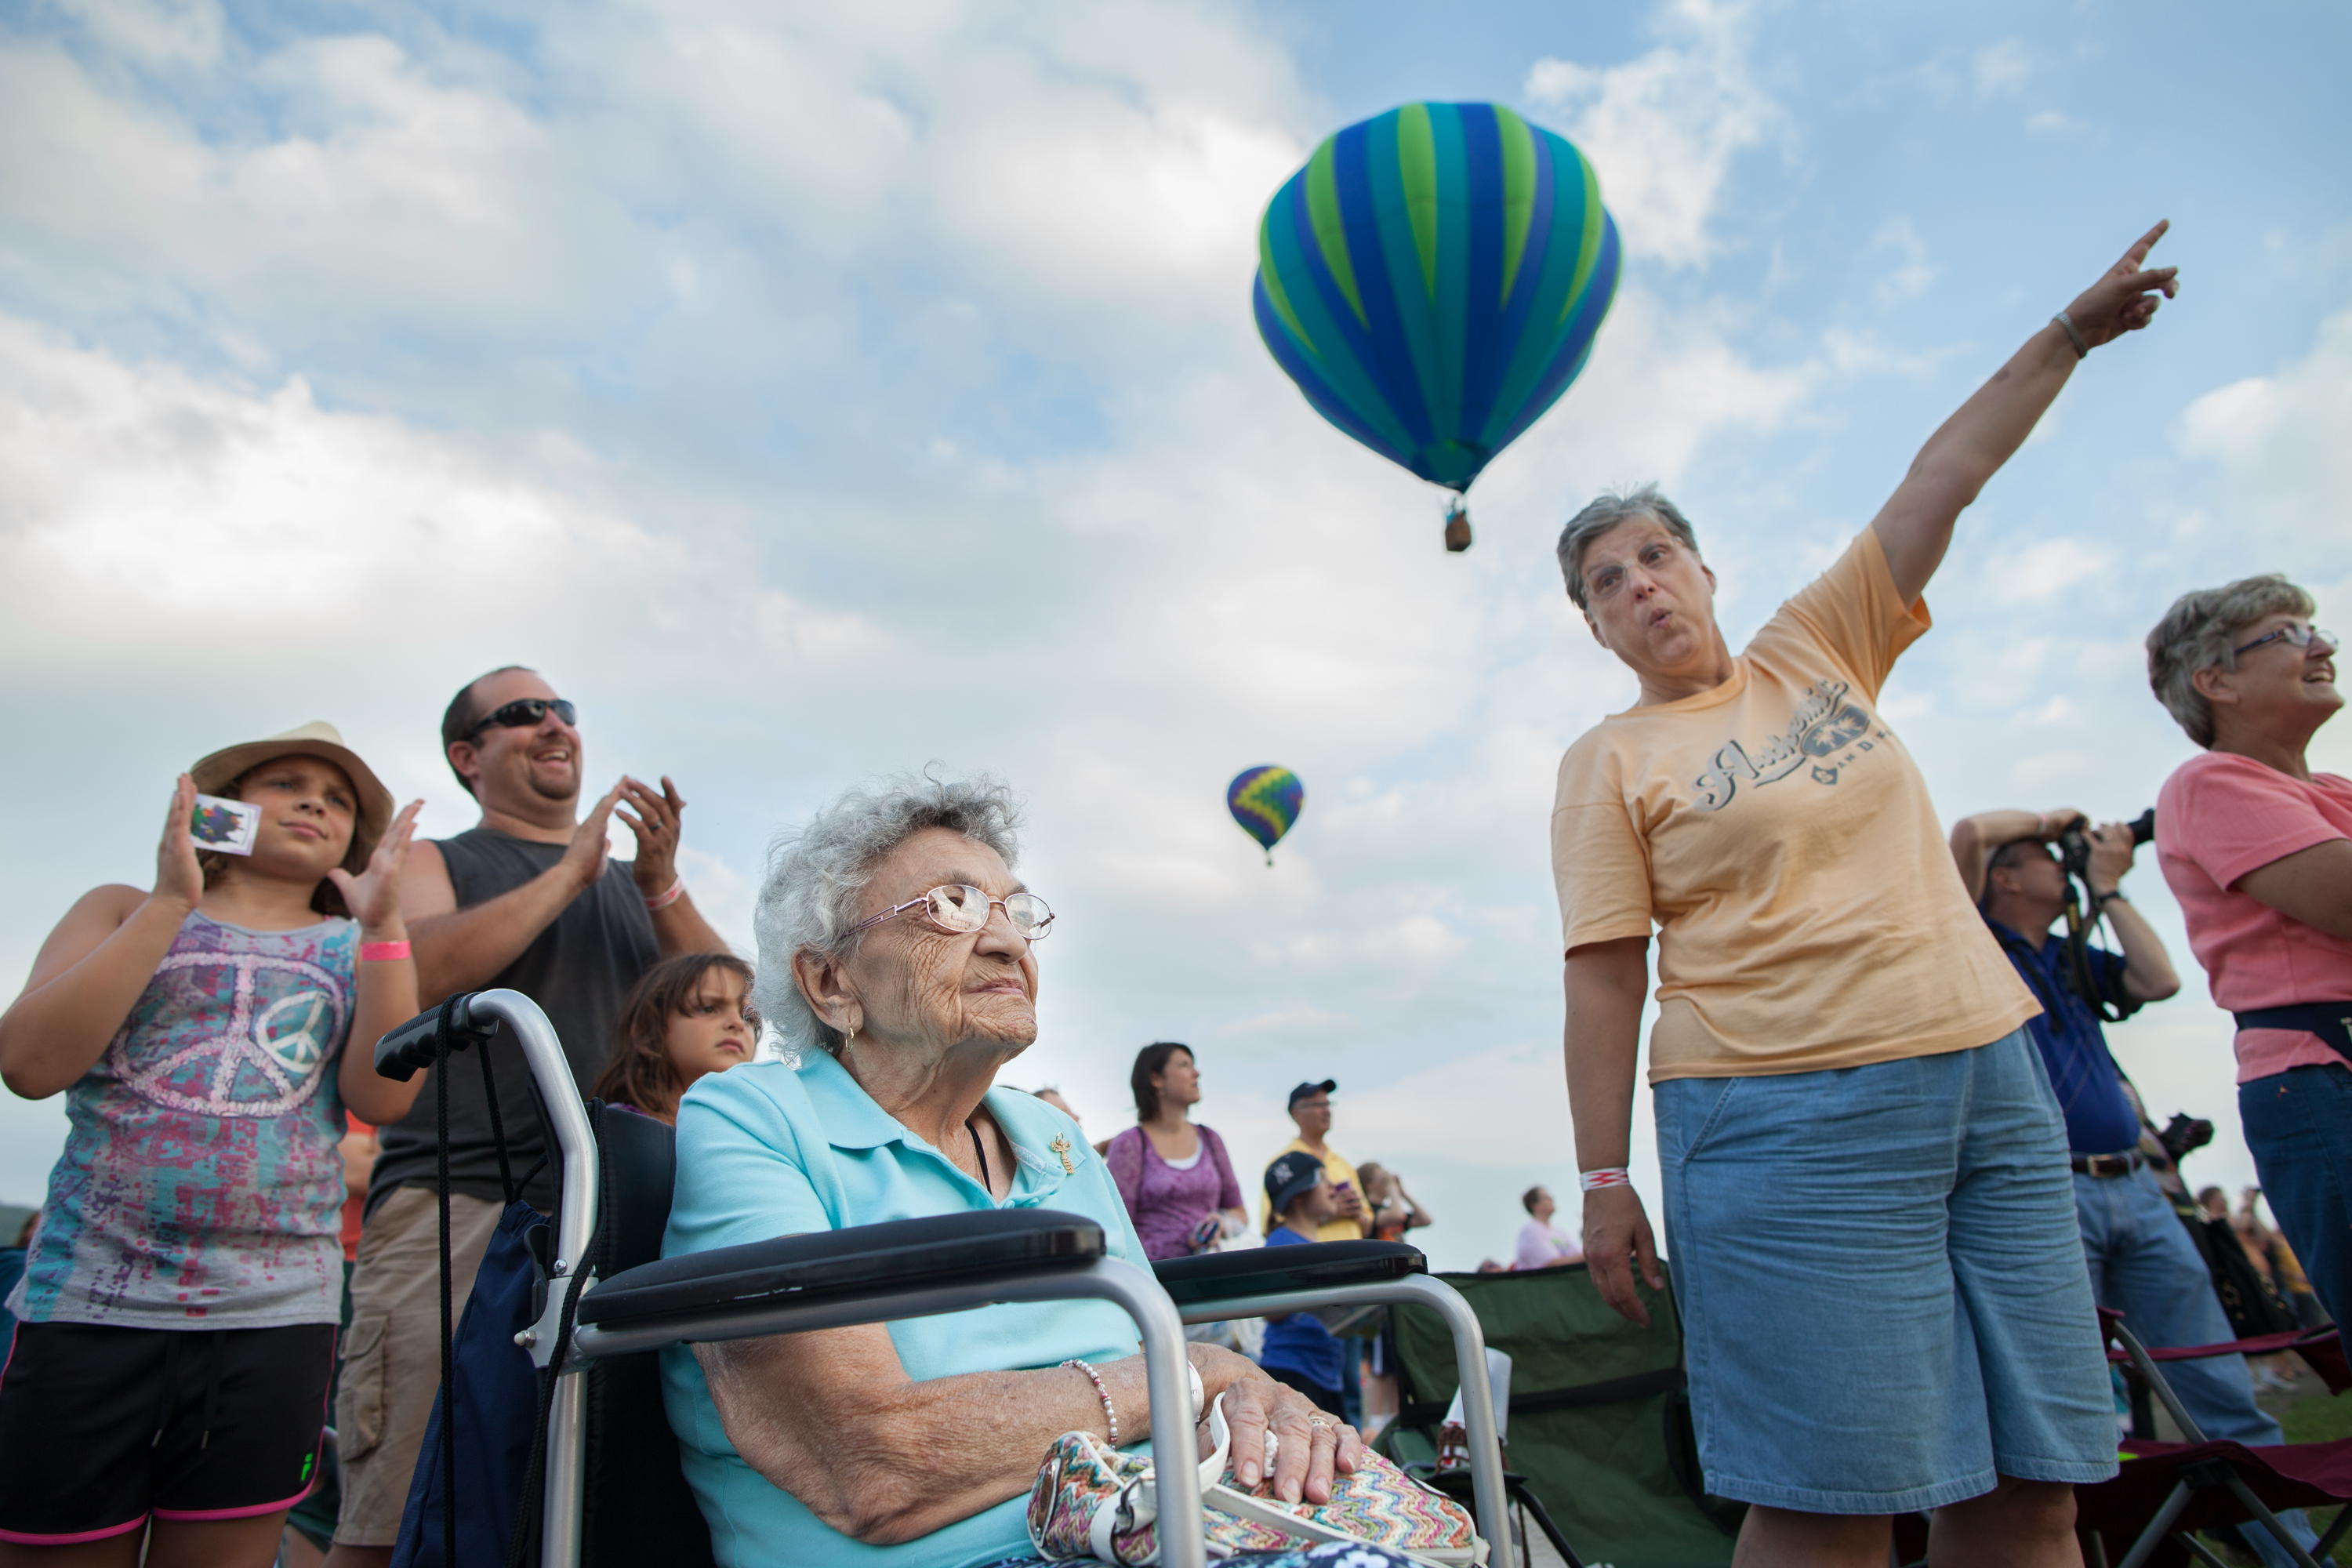 Surrounded by family, Gertrude Zelma, 93, of Akron, NY, watches hot air balloons launch at the 32nd Annual New York State Festival of Balloons in Dansville, NY on Aug. 31, 2013. Gertrude's niece, right, teased that the family will send her up in a hot air balloon on her 100th birthday.